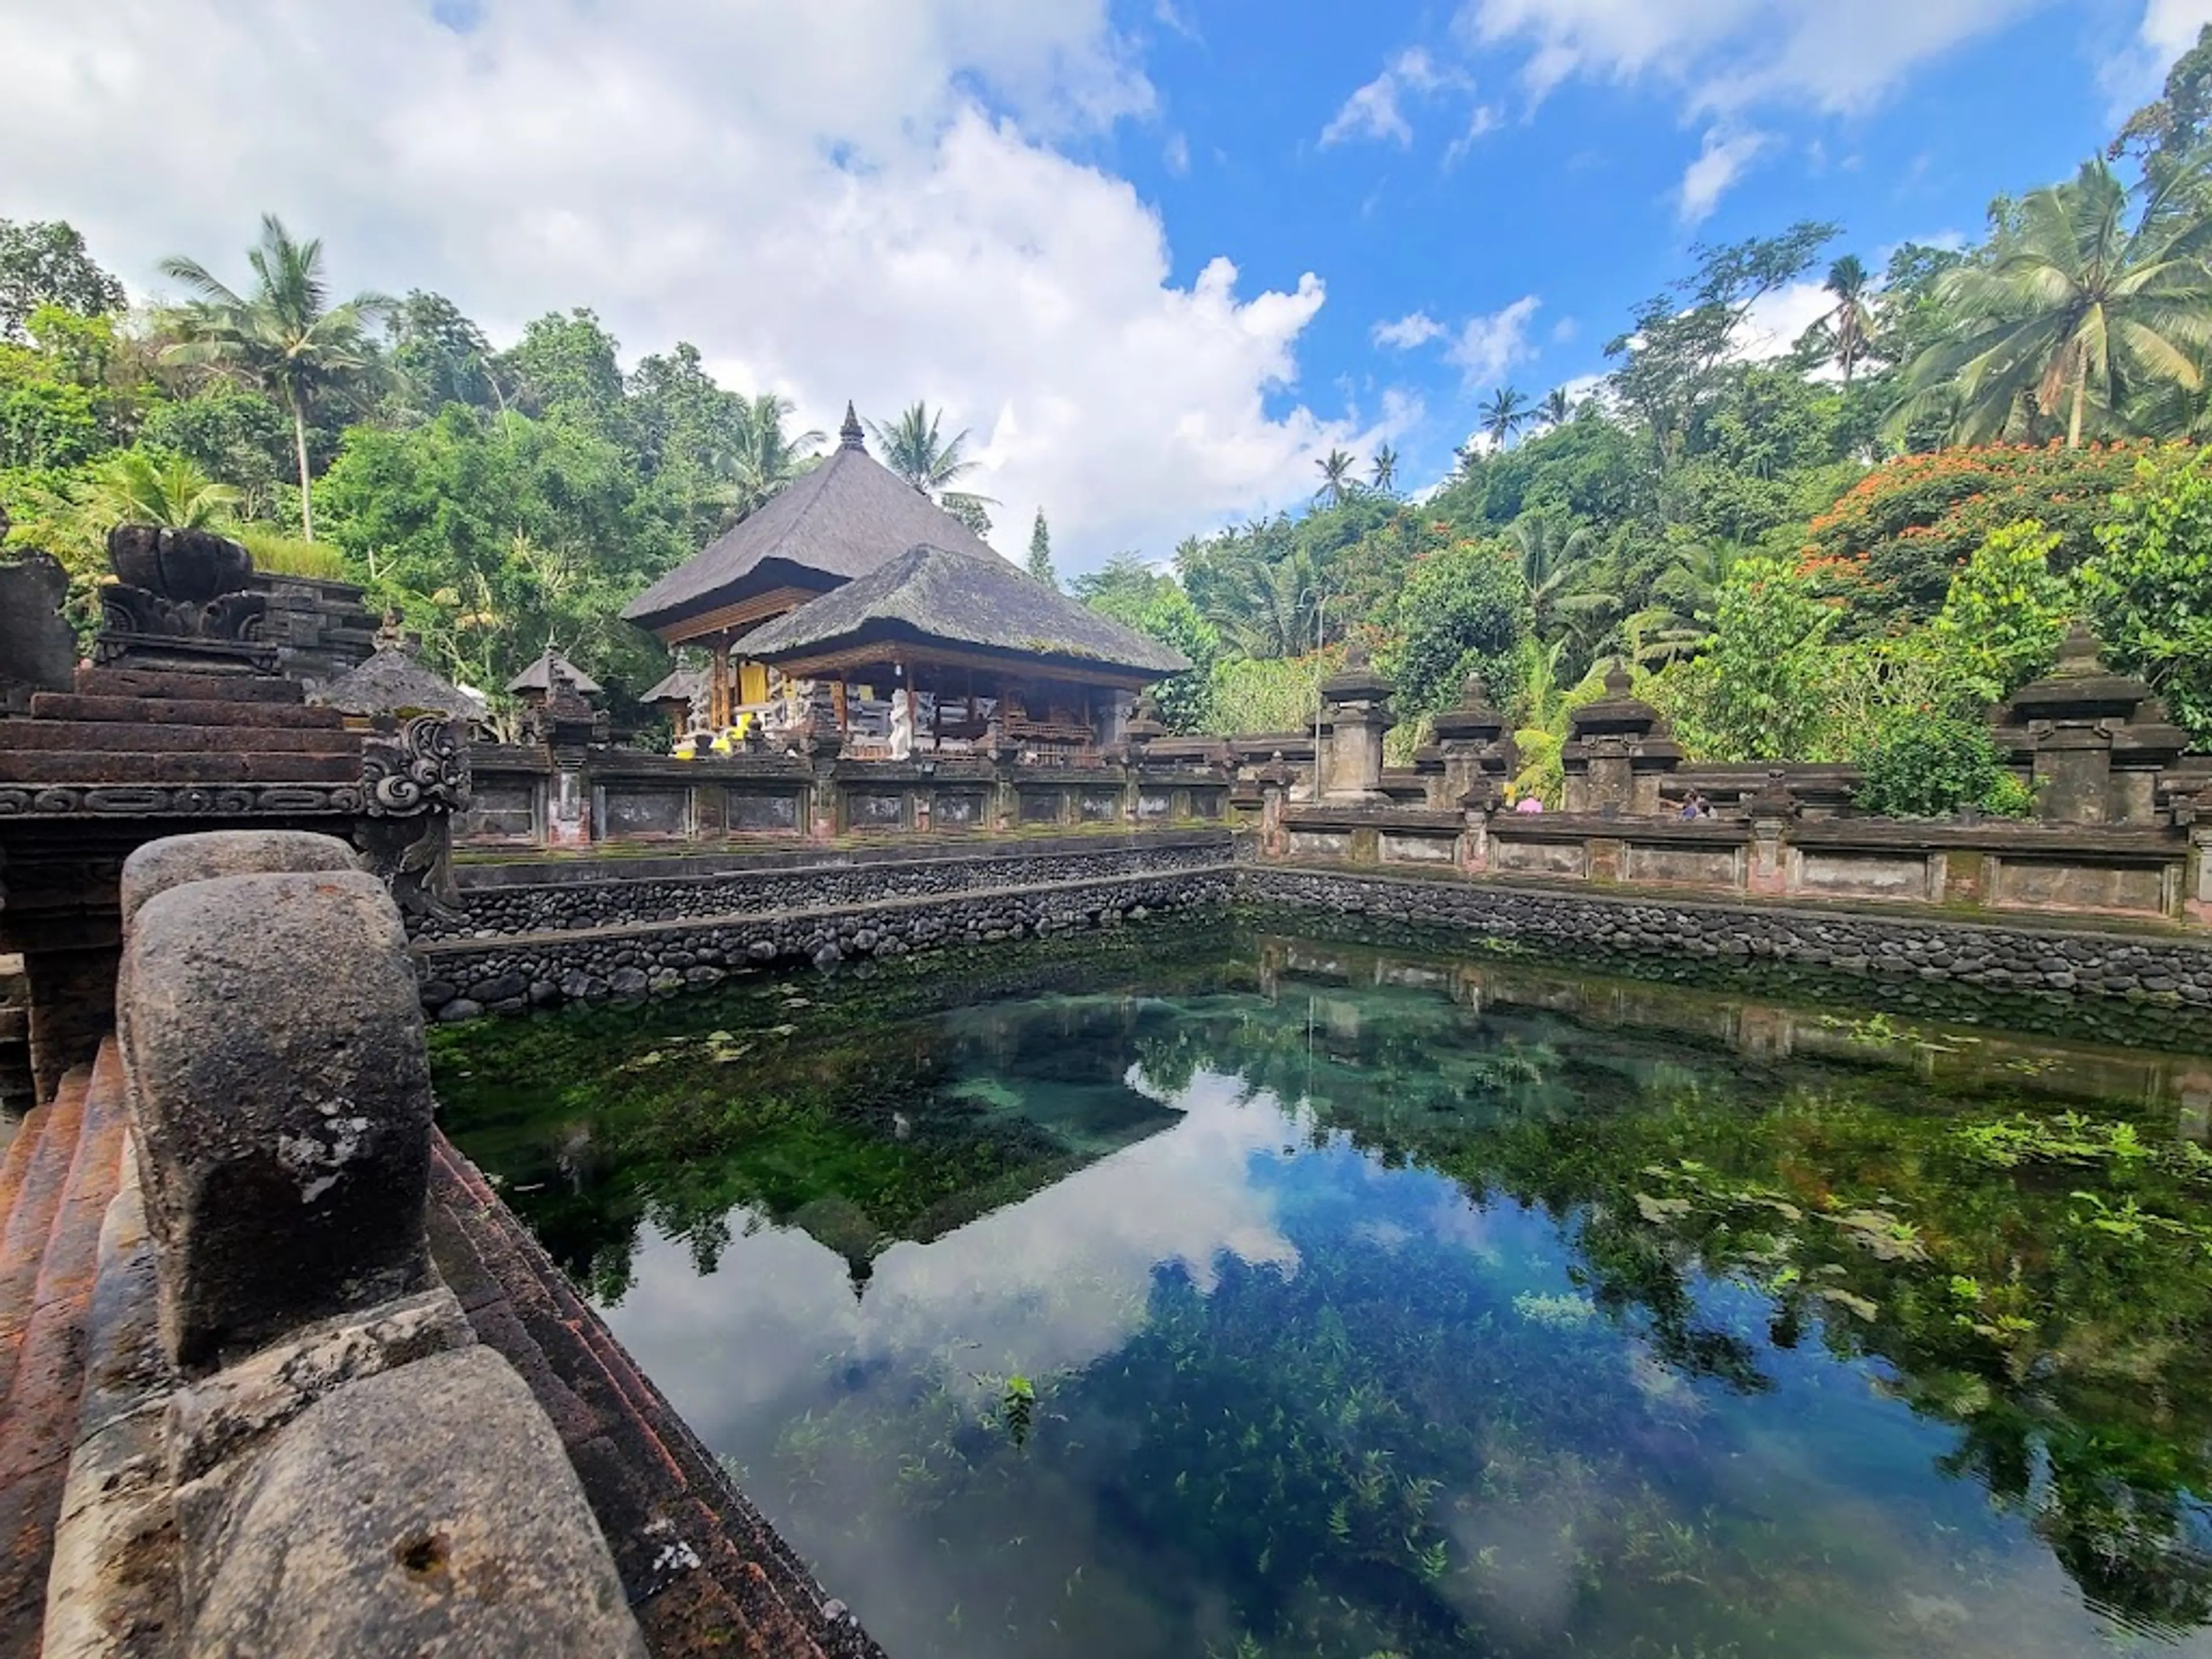 Traditional Balinese temple